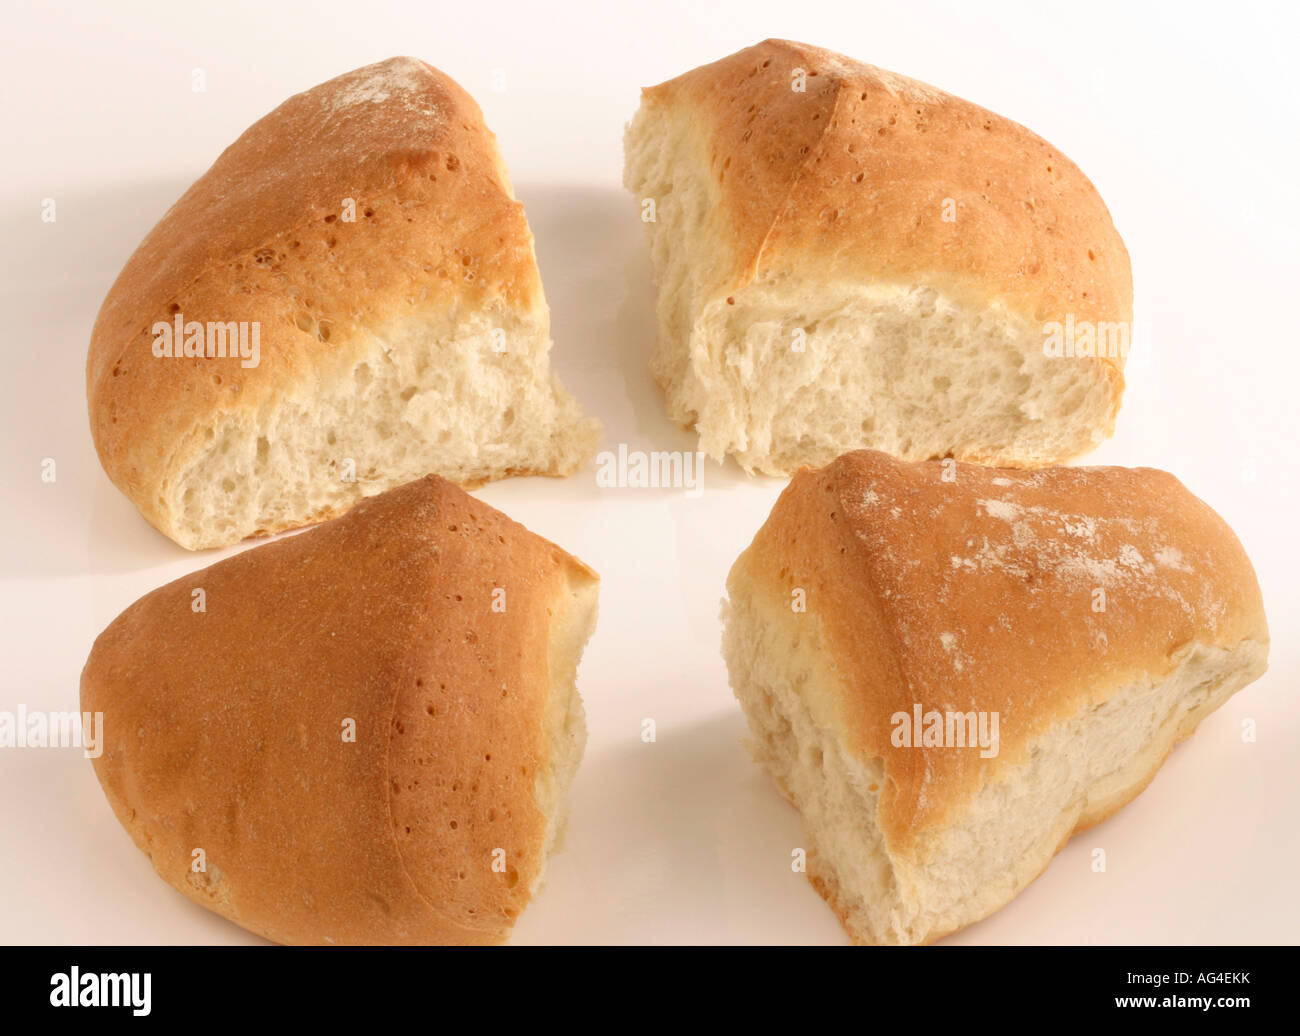 A loaf of bread divided into four quarters Stock Photo